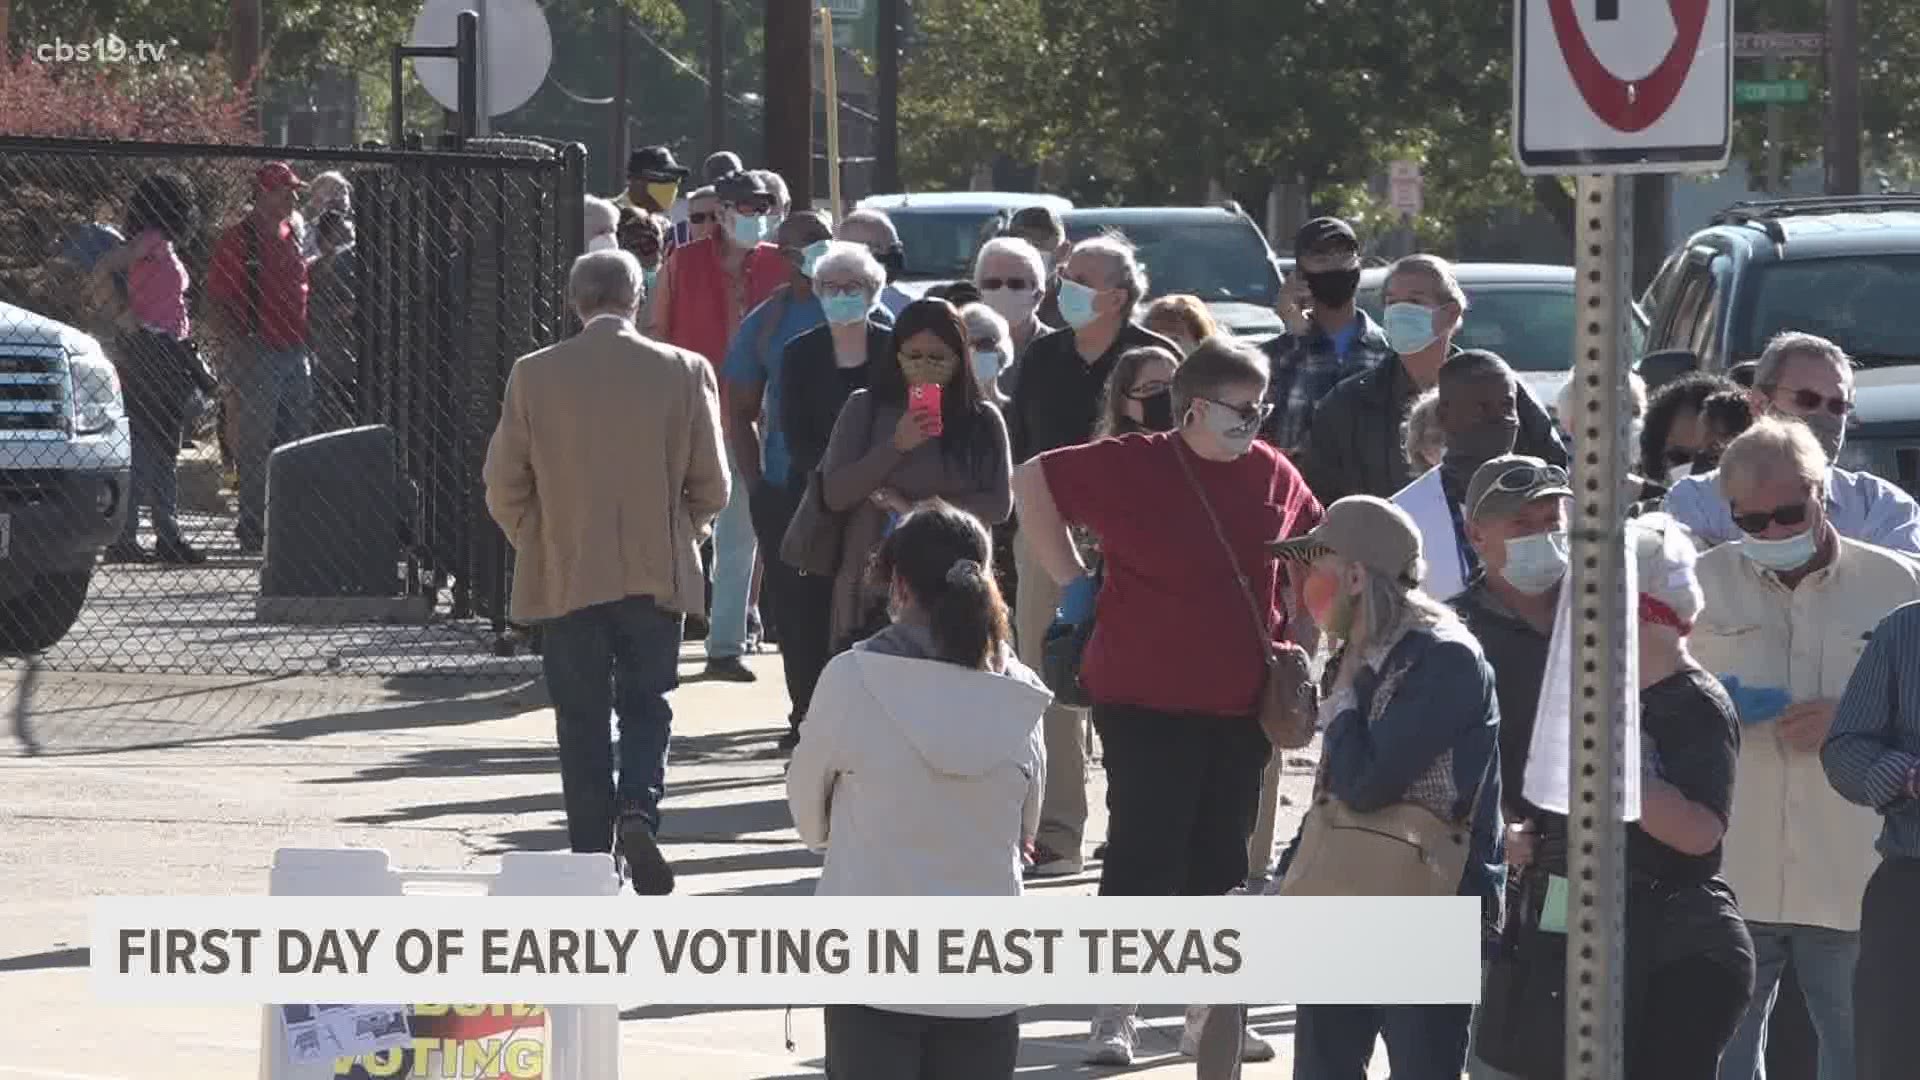 Long lines awaited voters who cast ballots on the first day of early voting. Early voting runs from Oct. 13 through Oct. 30.